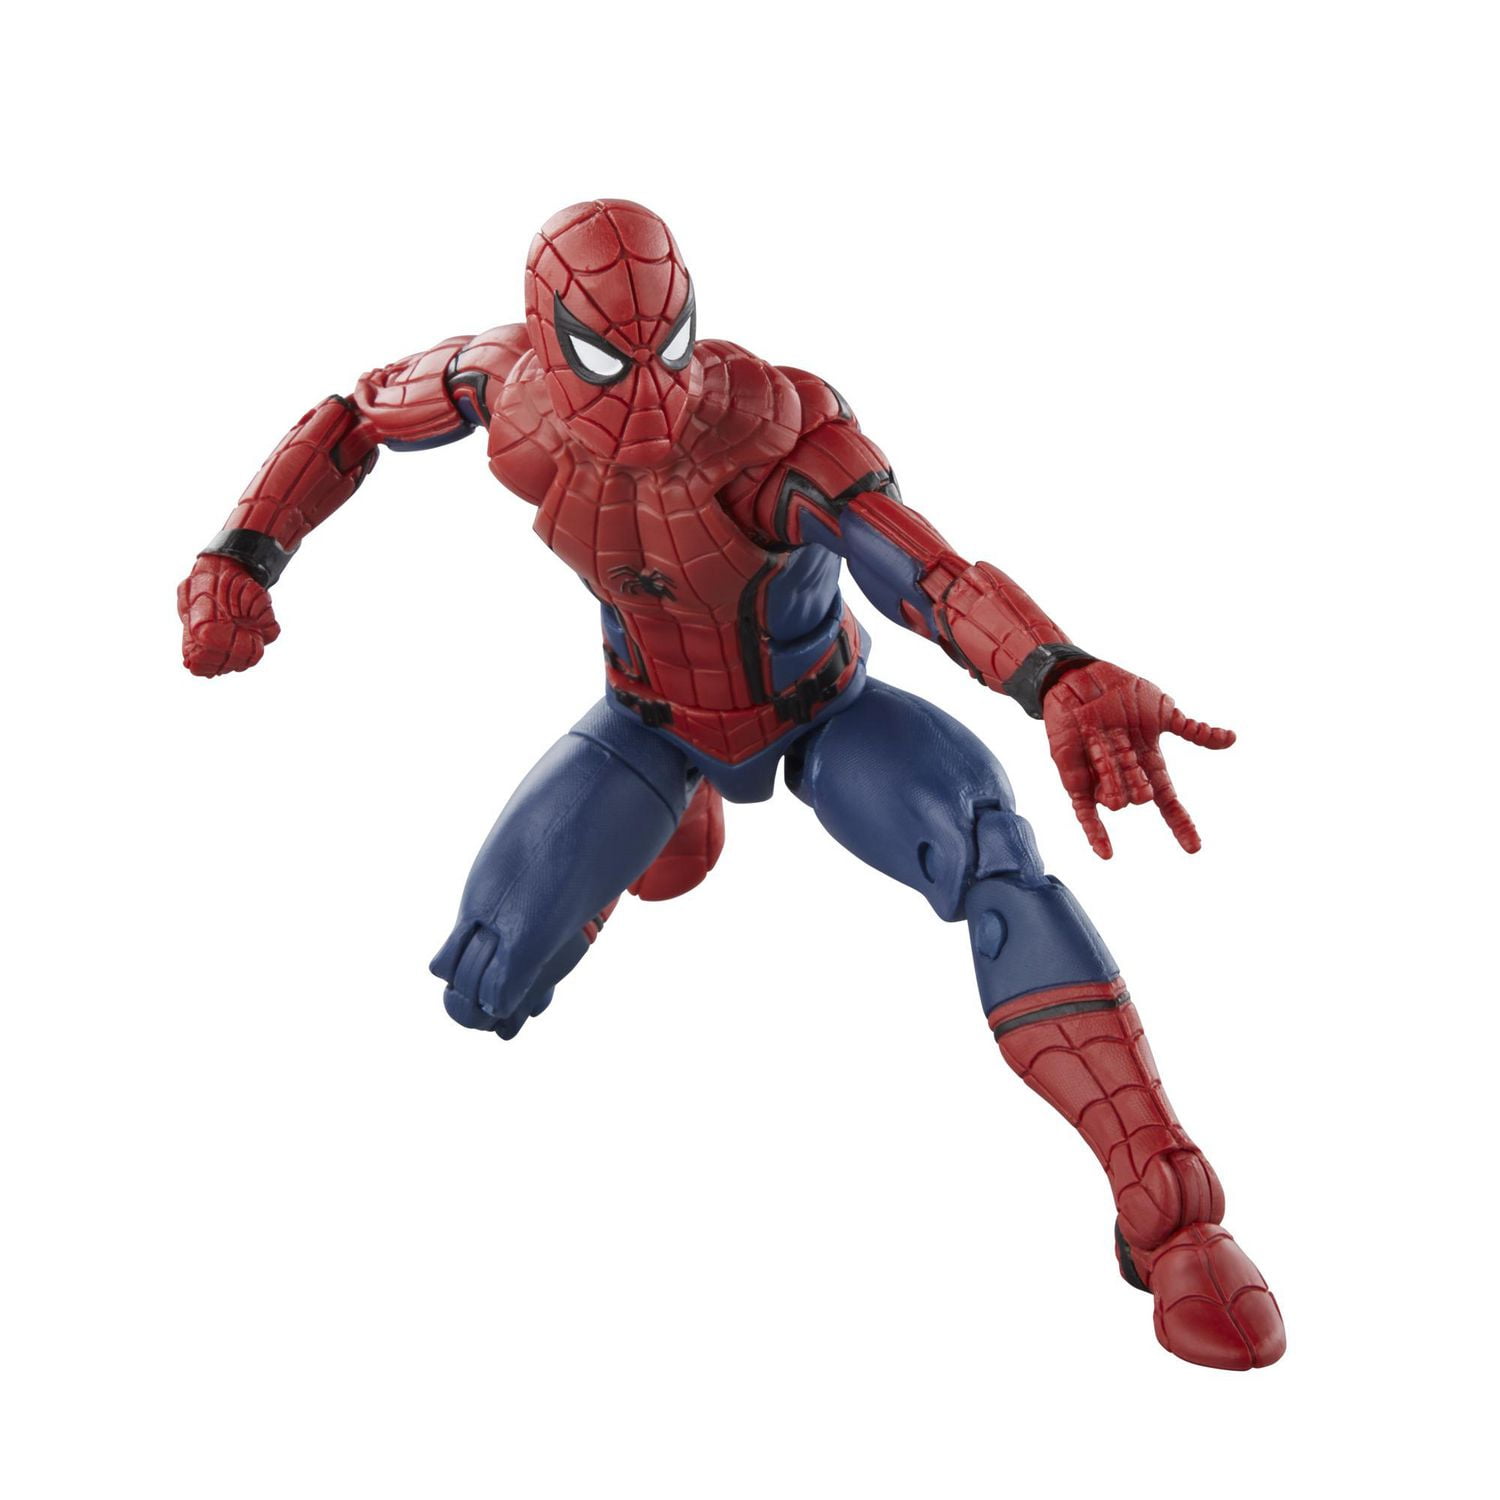 Hasbro Marvel Legends Series Spider-Man, Captain America: Civil War  Collectible 6 Inch Action Figures, Marvel Legends Action Figures 